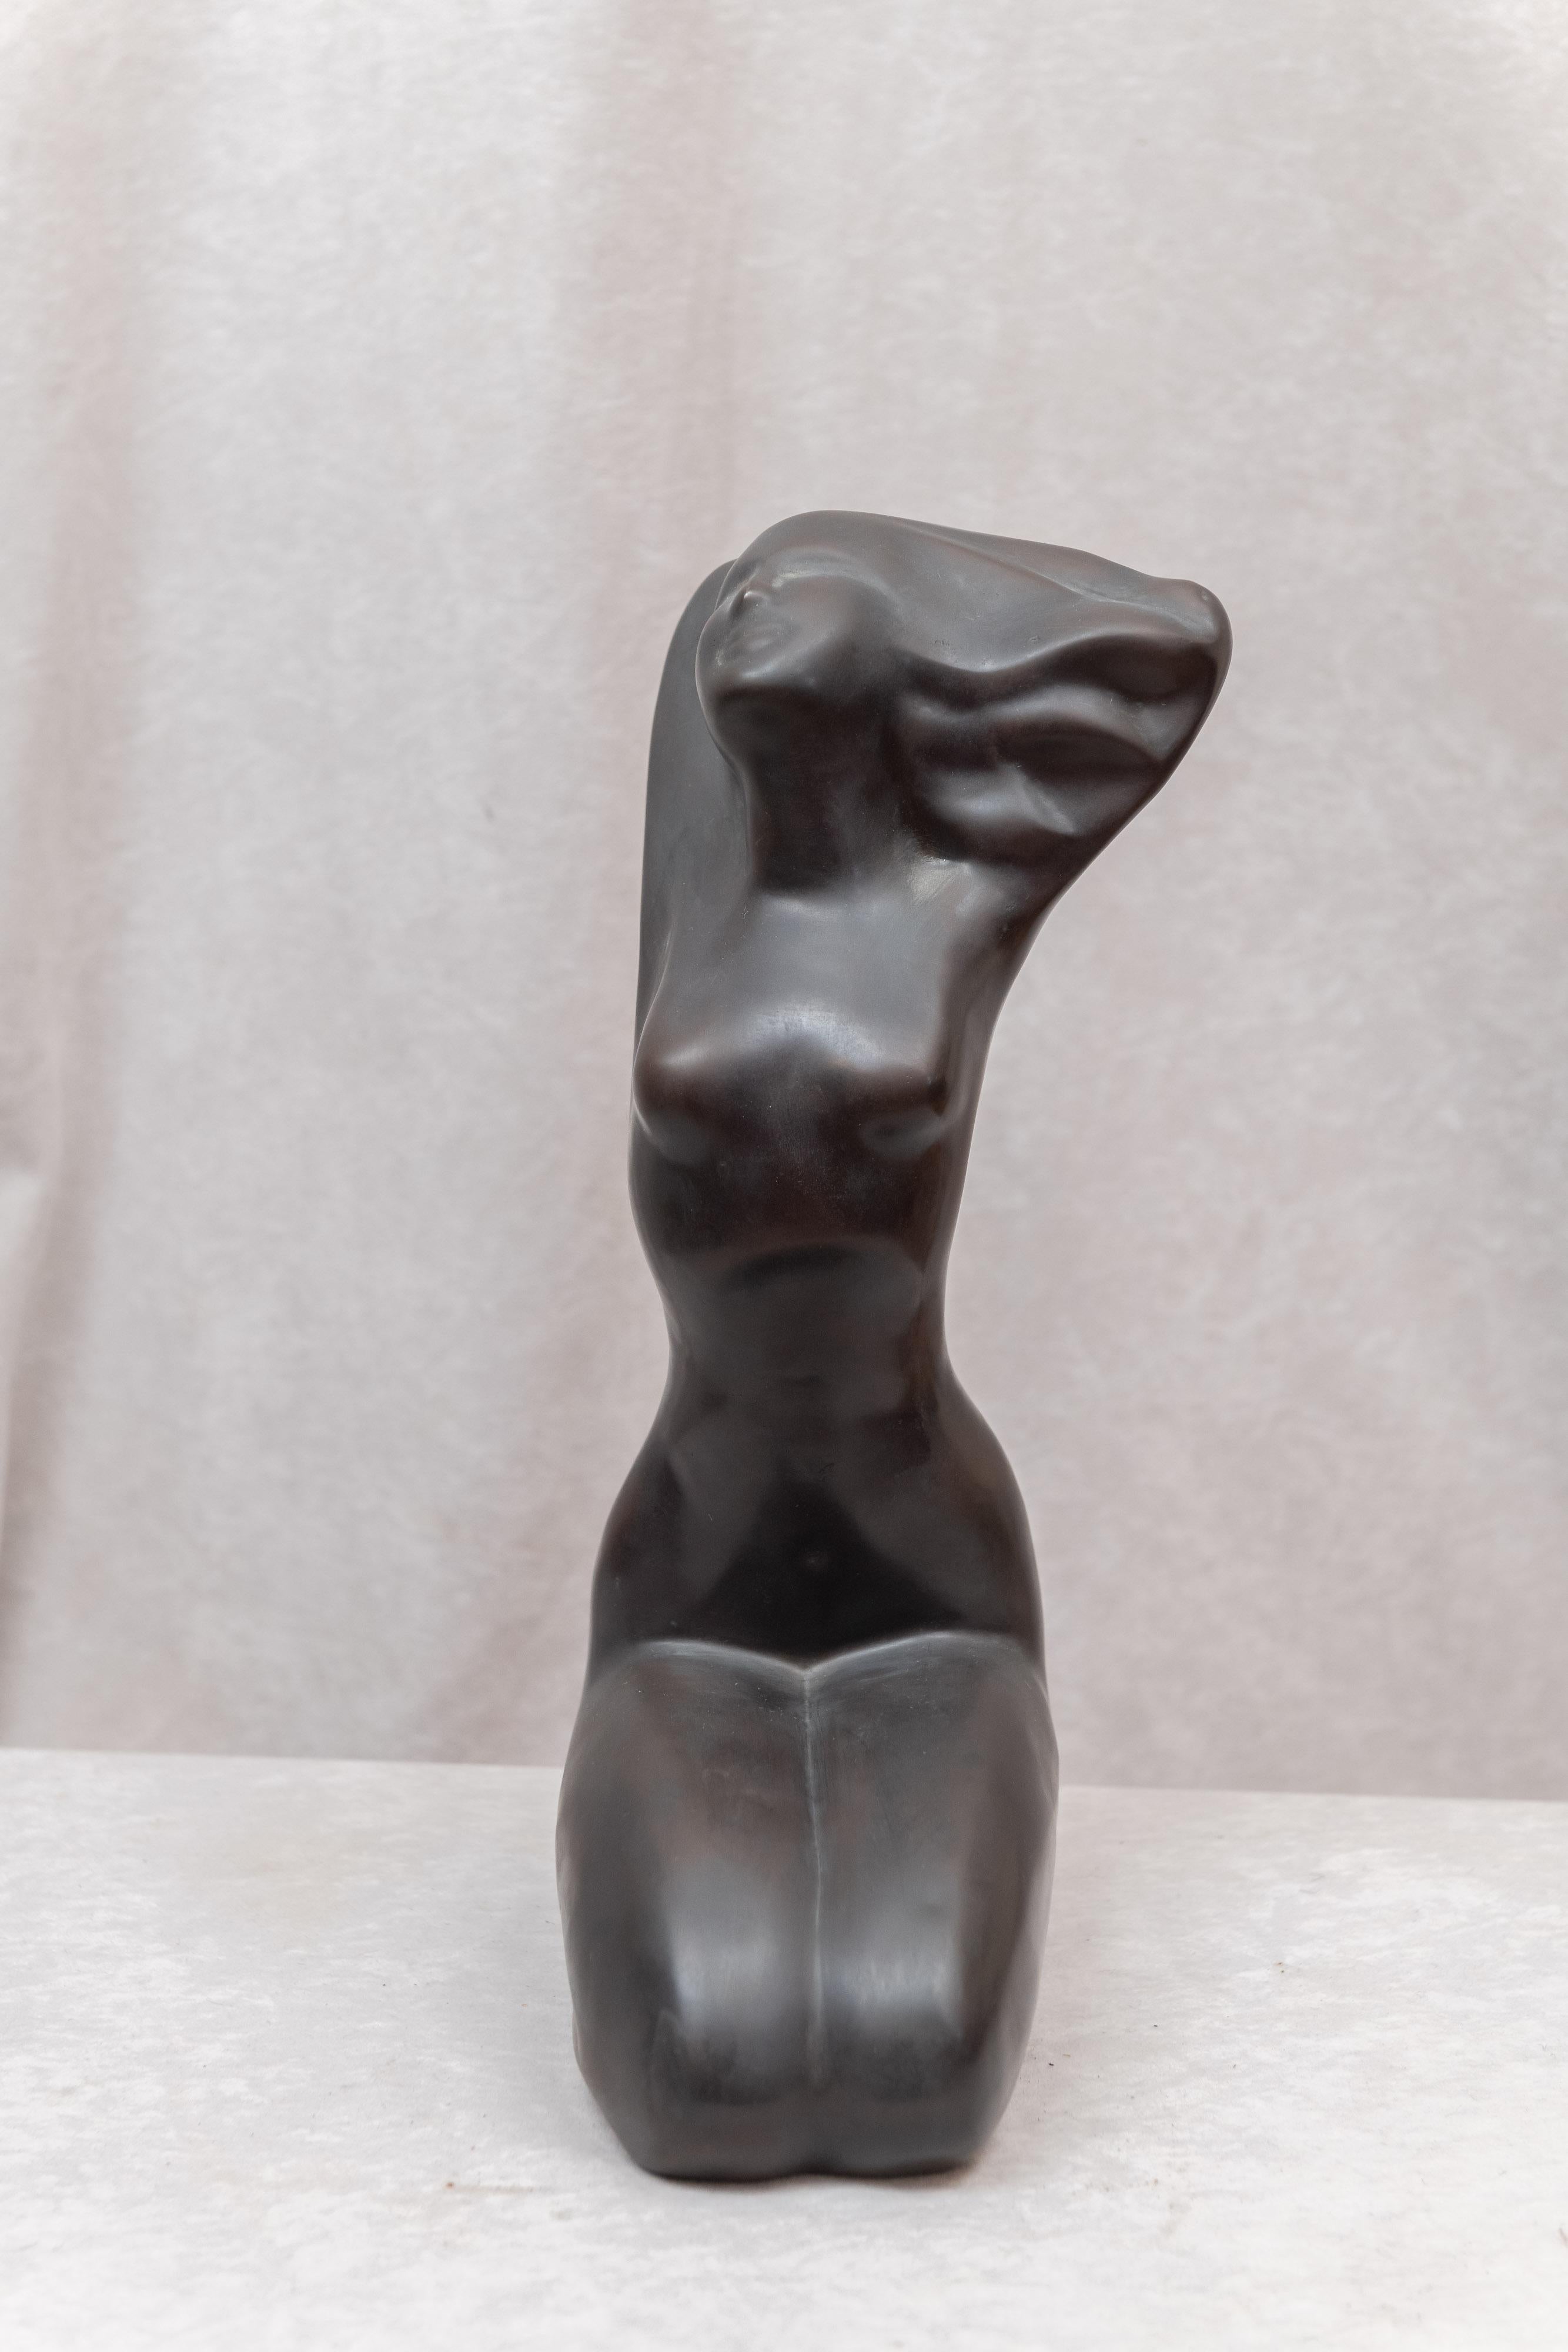 We are bronze dealers, and we normally have well over 100 bronze sculptures in our shop. We rarely carry this genre of sculpture, however this one caught our attention. We believe it was done in the late 1940s and was made here in the U.S.
The